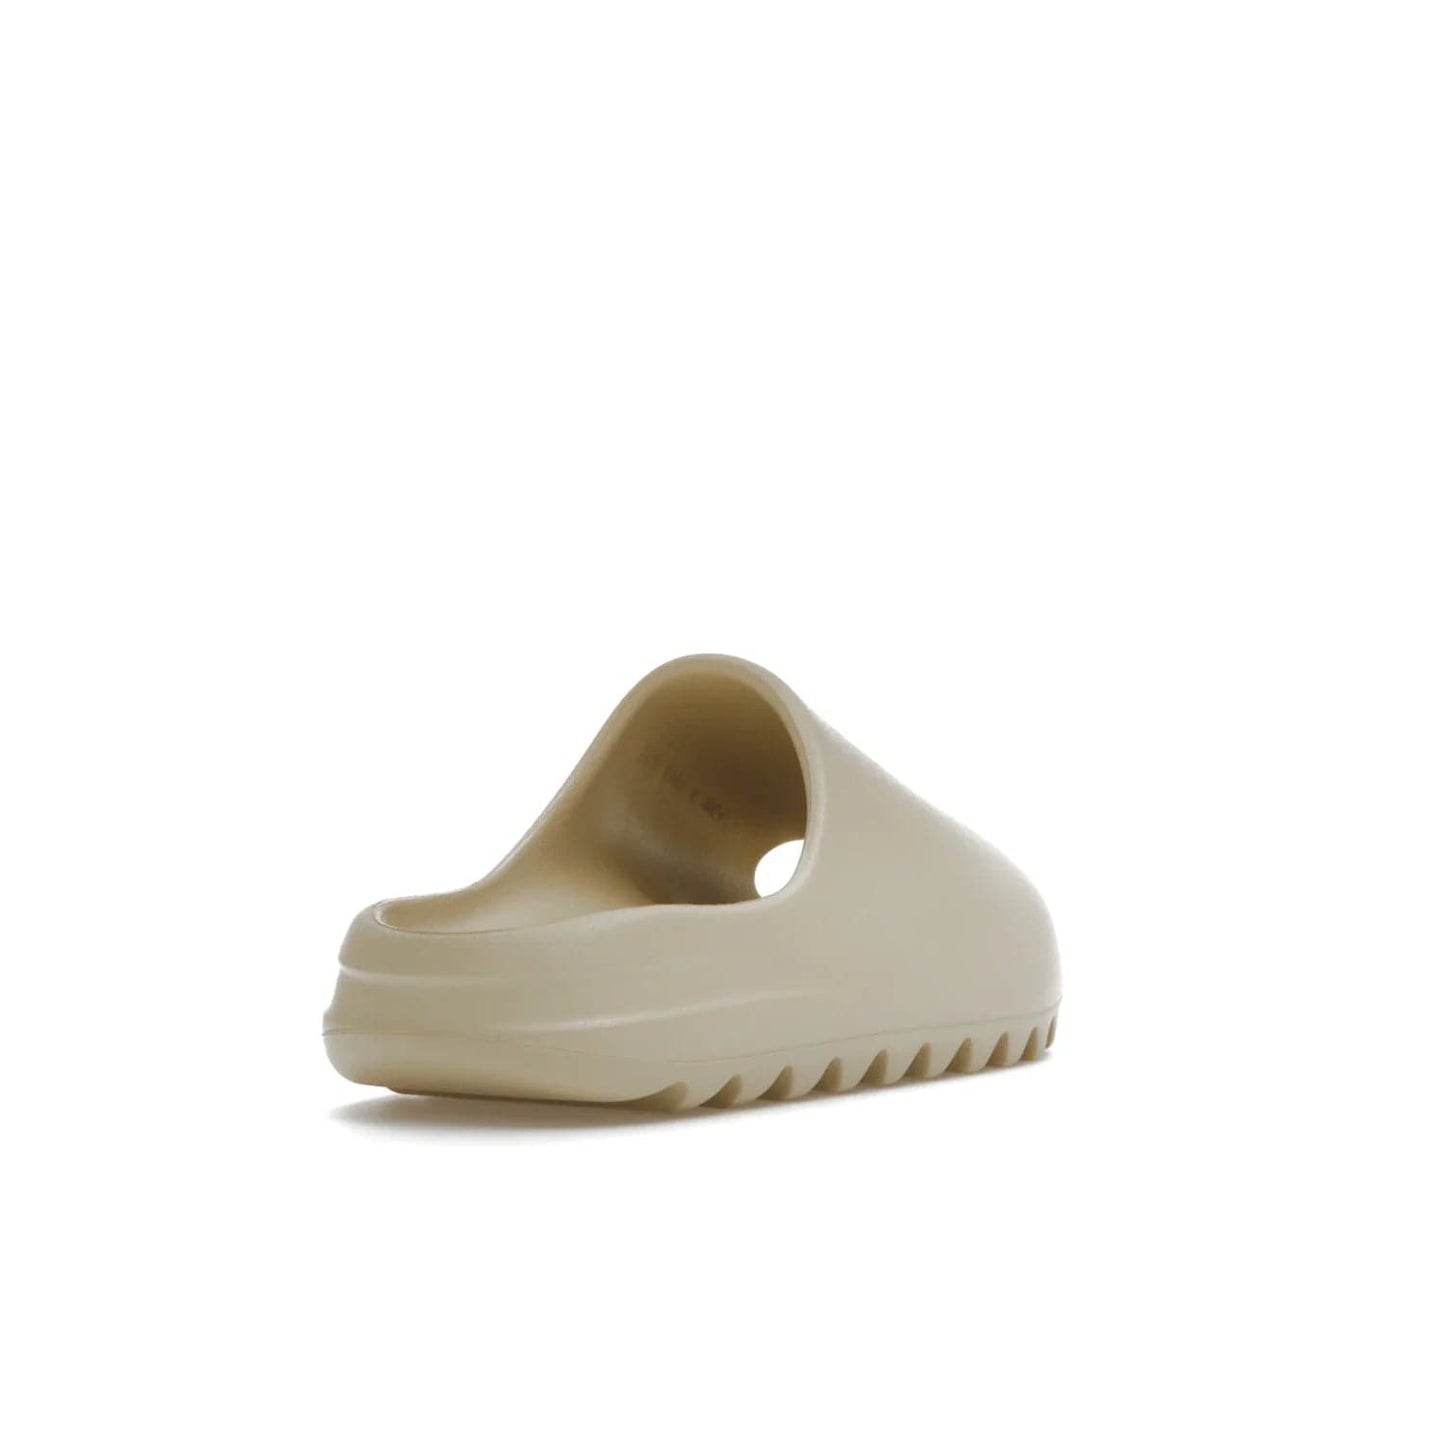 adidas Yeezy Slide Bone (2022 Restock) - Image 31 - Only at www.BallersClubKickz.com - Stay comfy with the adidas Yeezy Slide Bone - a fashionable silhouette with all-day comfort. This Bone/Bone/Bone colorway combines style and comfort with a pebbled texture and grooved sole. Restocked in May 2022, this shoe is the perfect addition to your collection.